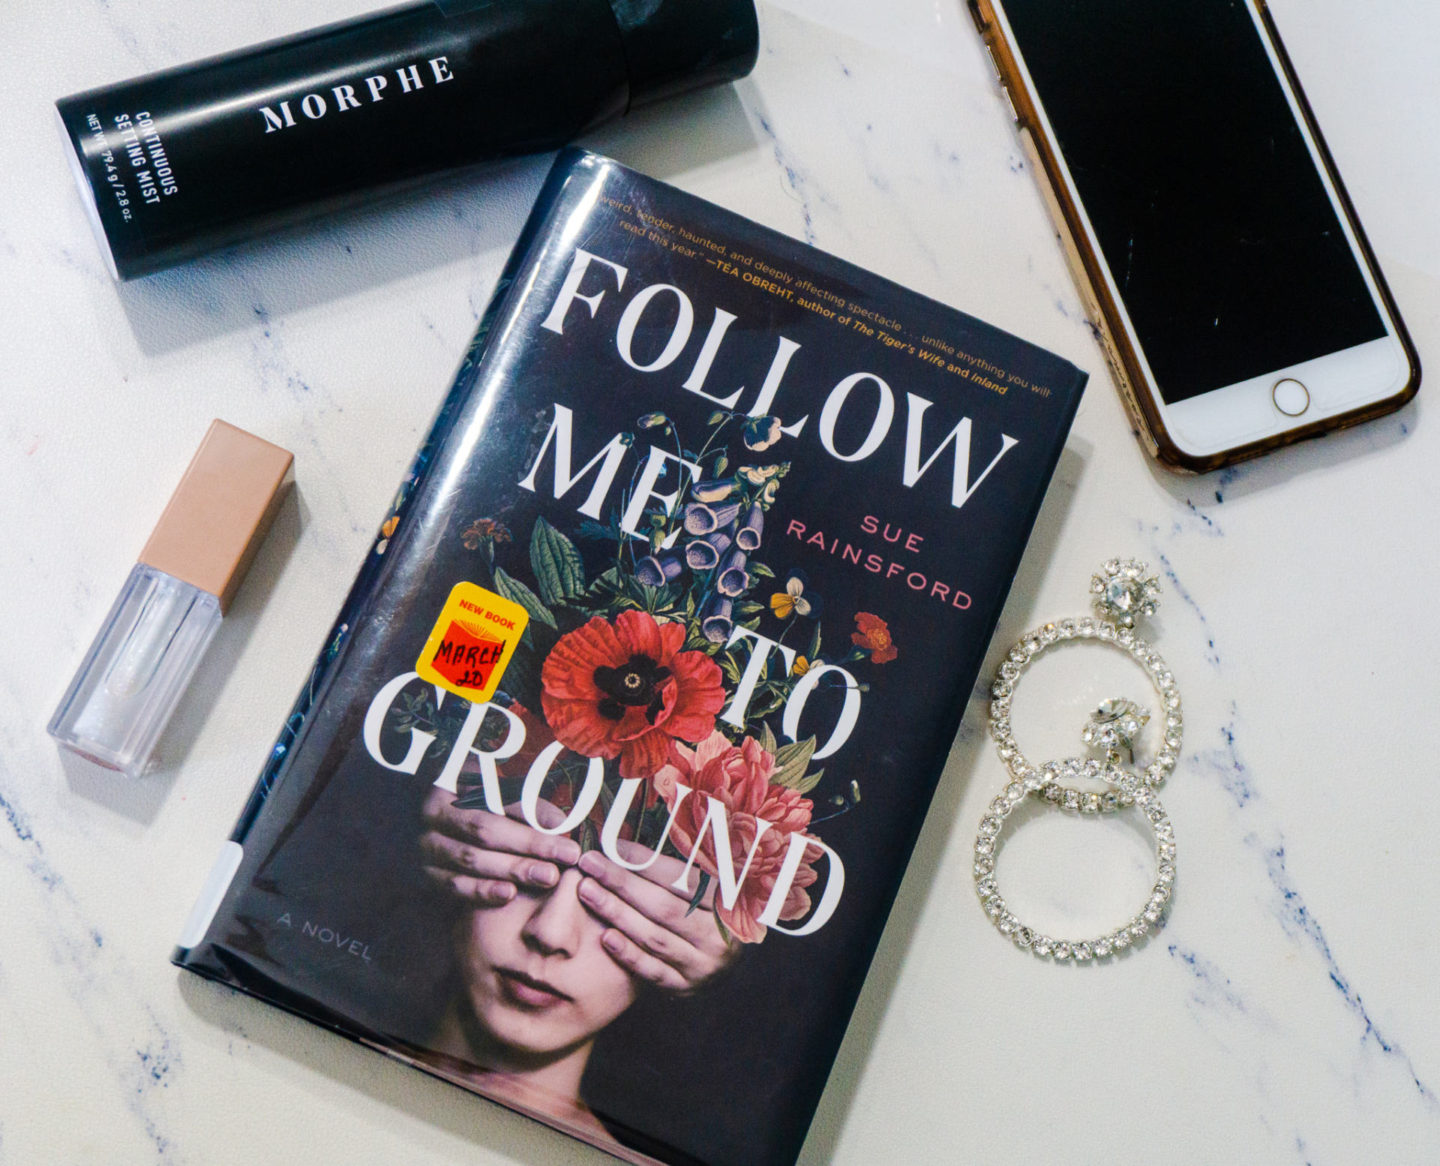 Follow Me To Ground Is An Innovative and Haunting Experience Flawless World image